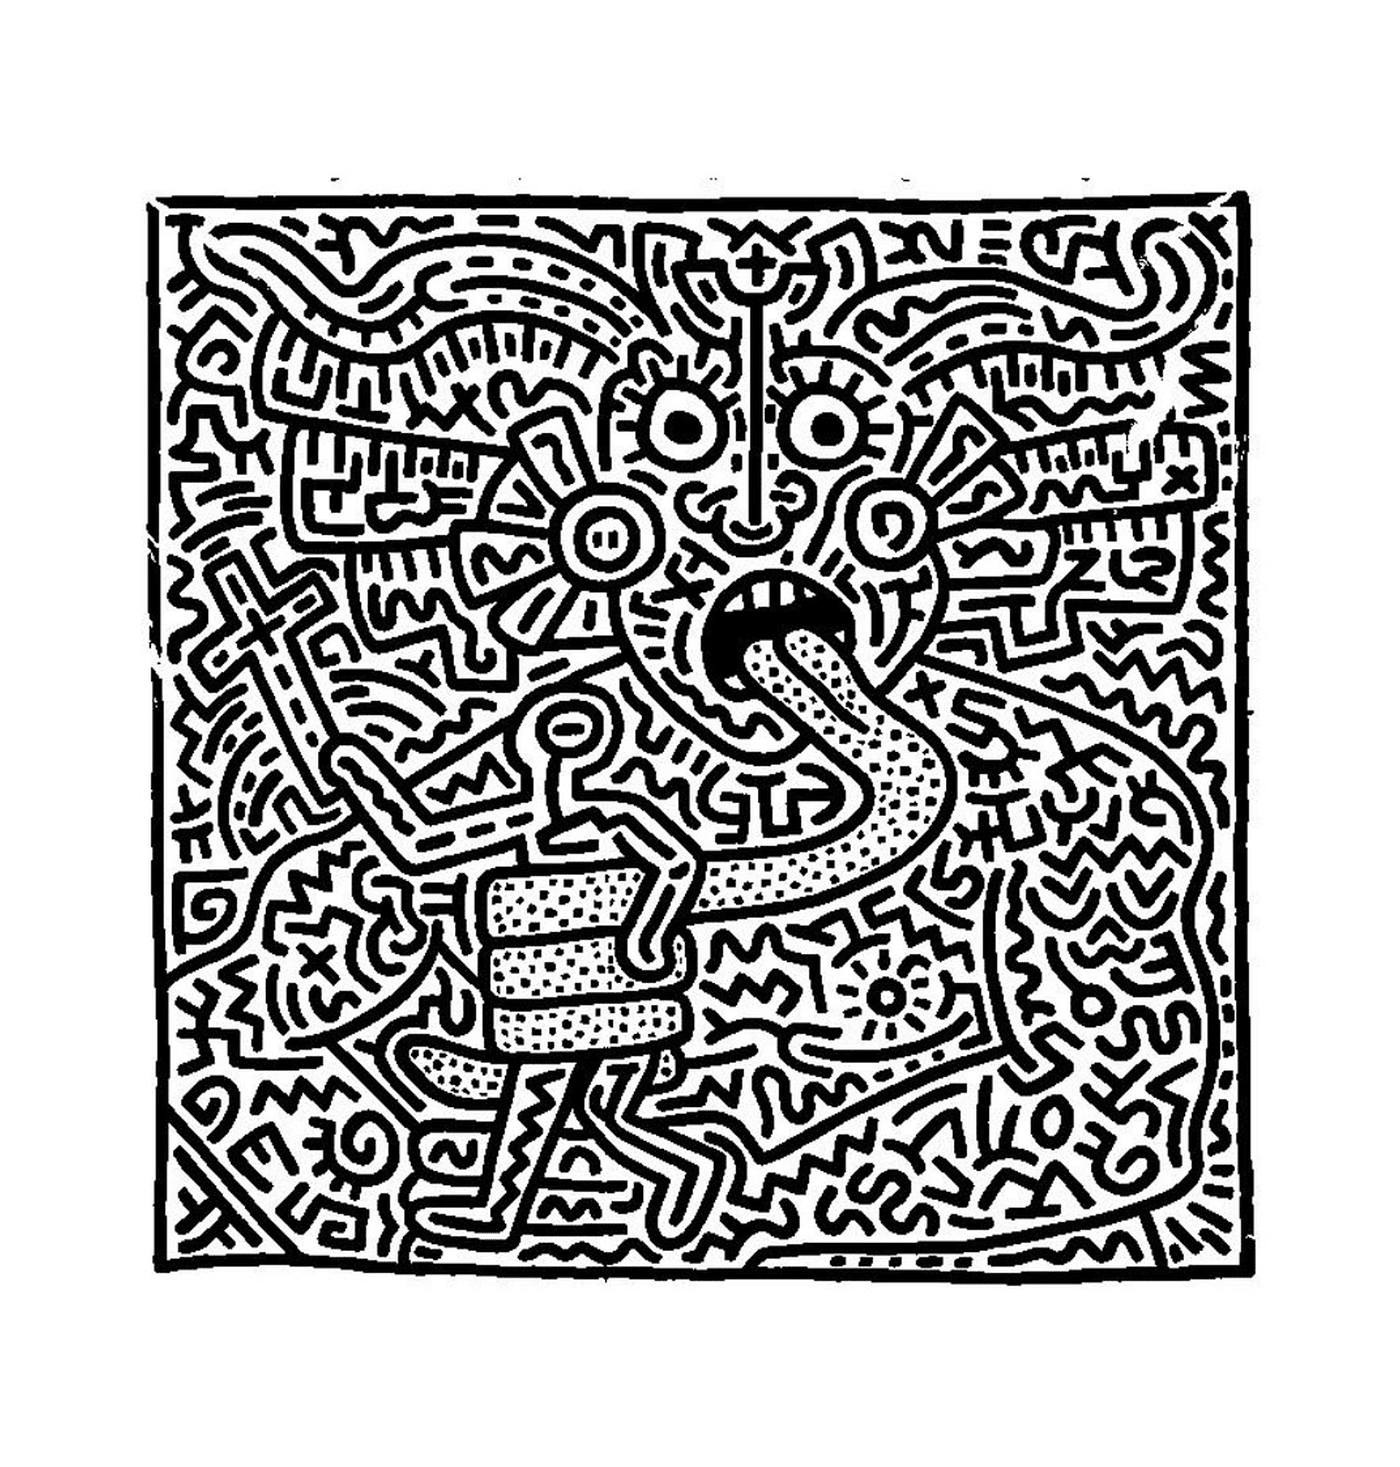  the face of a man according to Keith Haring 